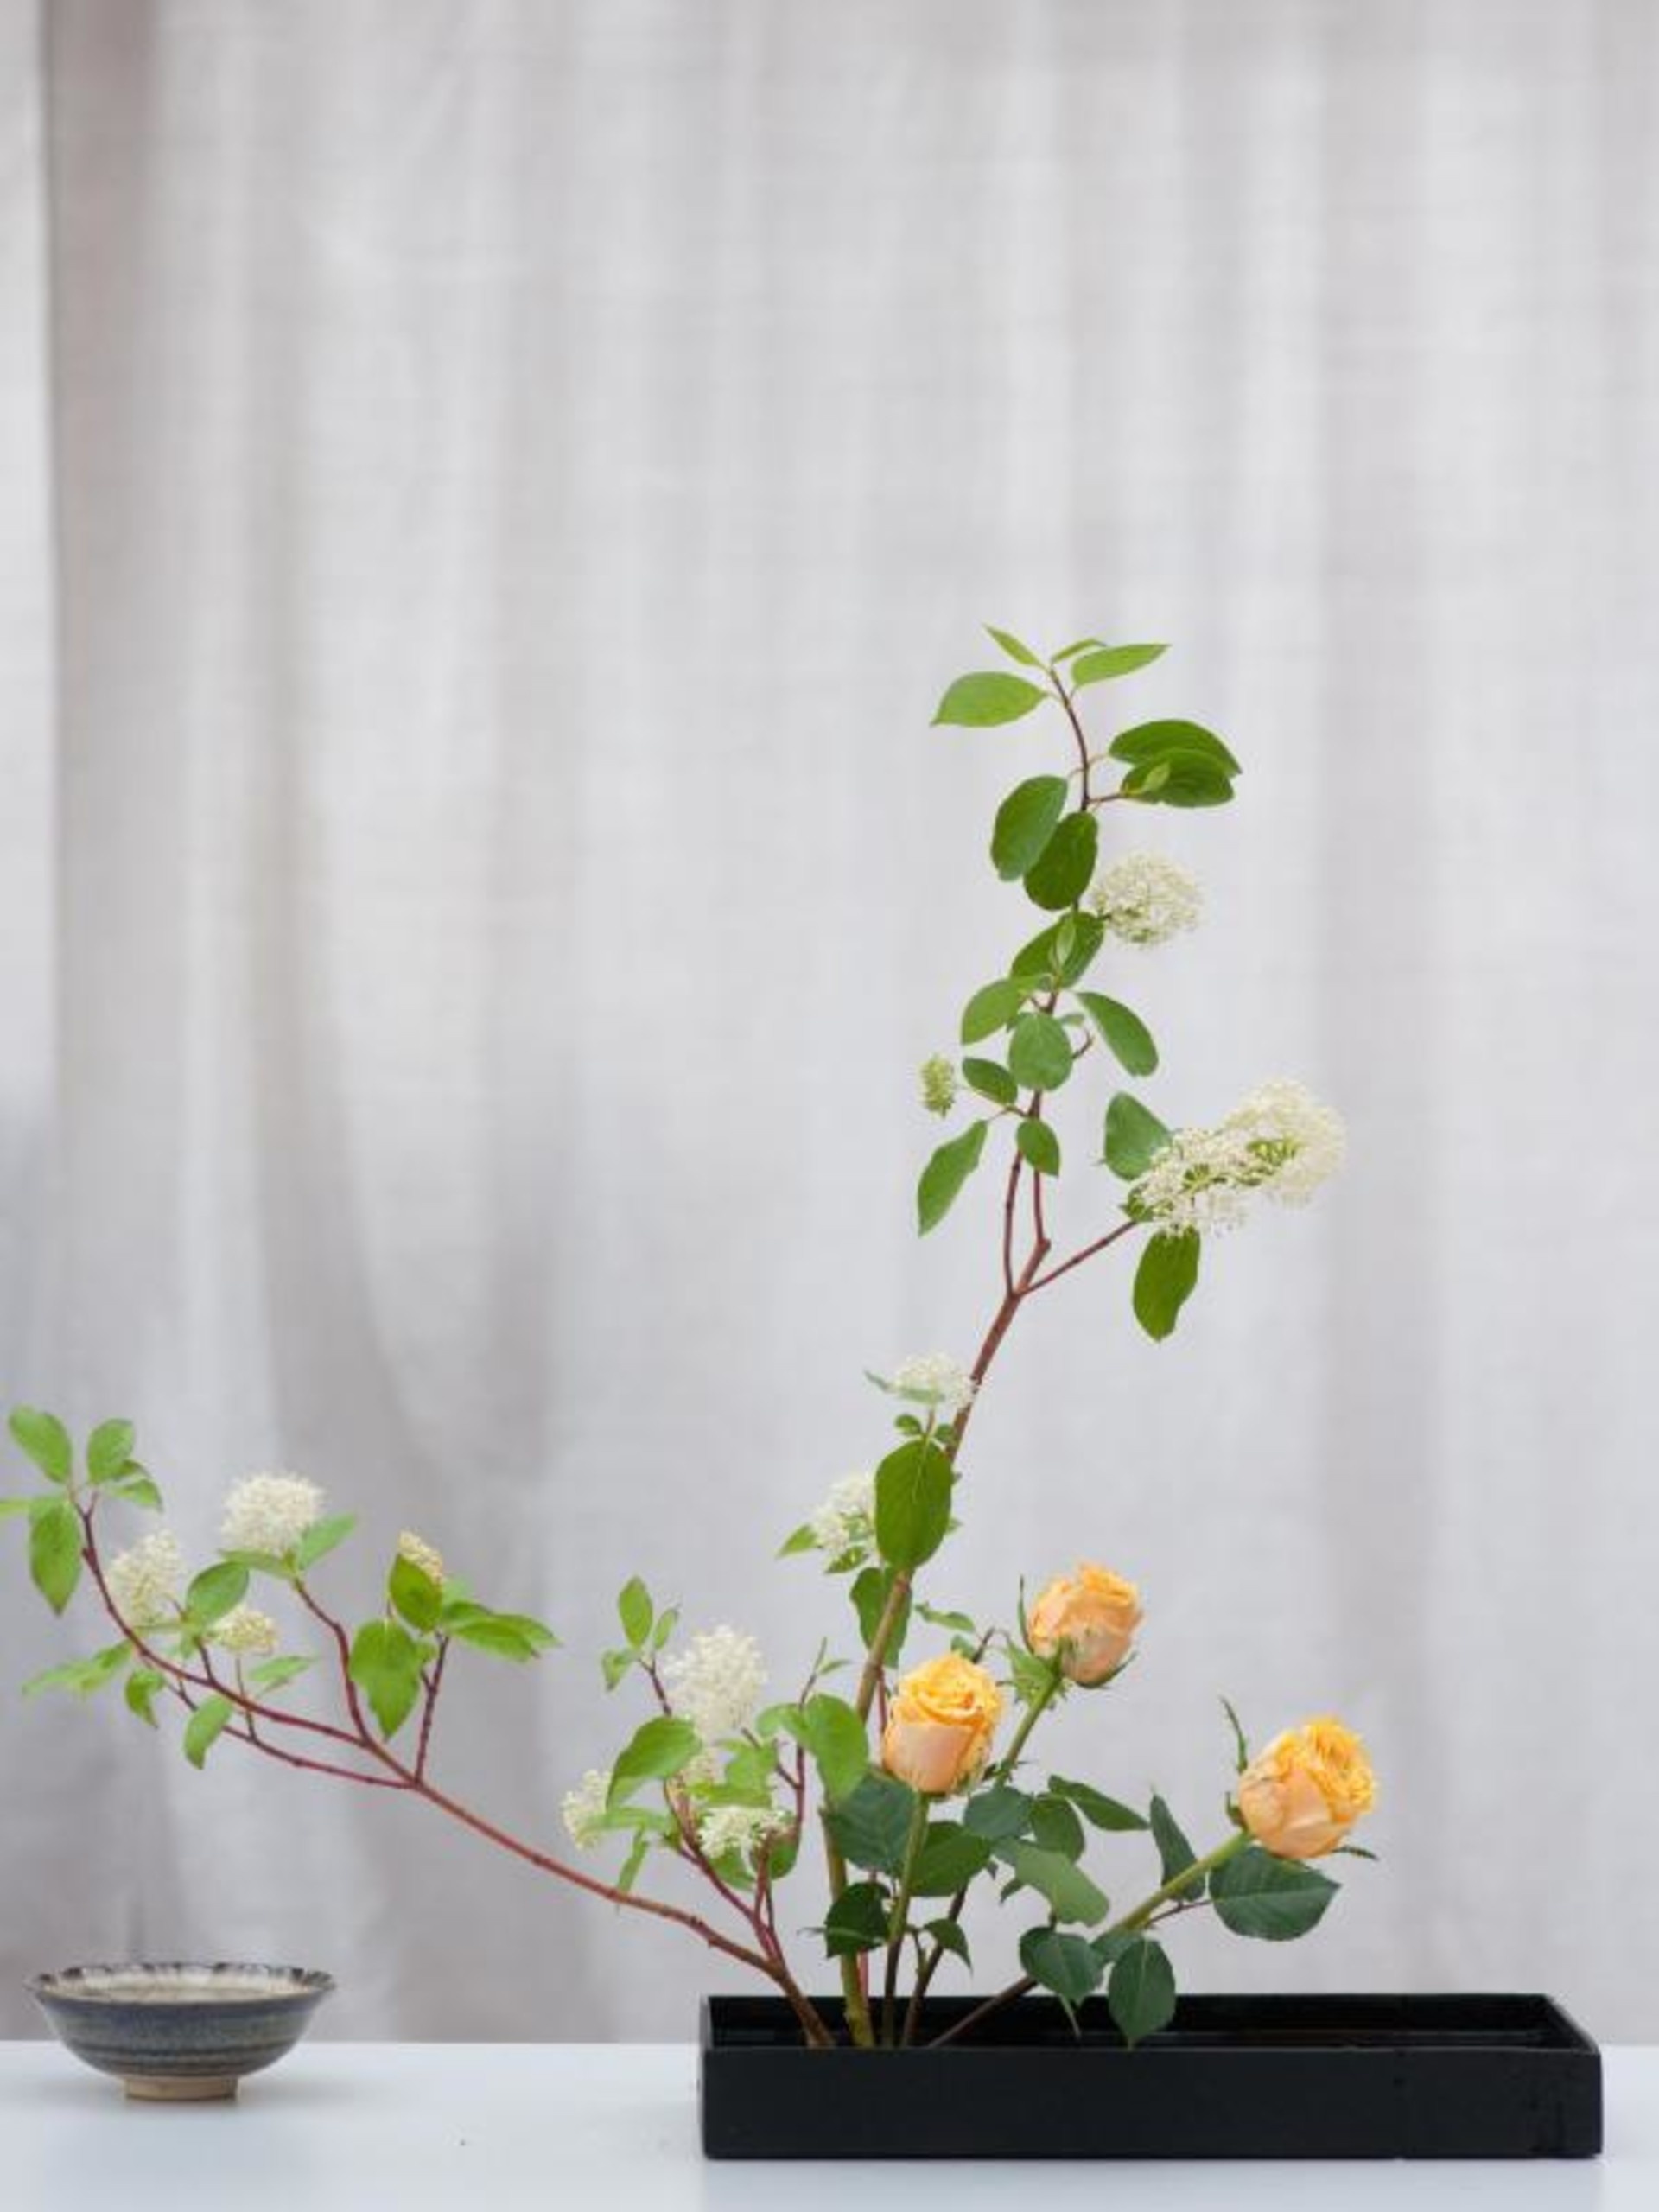 Ikebana wallpaper, Christopher Sellers post, Nature's delicate charm, Artistic inspiration, 1920x2560 HD Handy